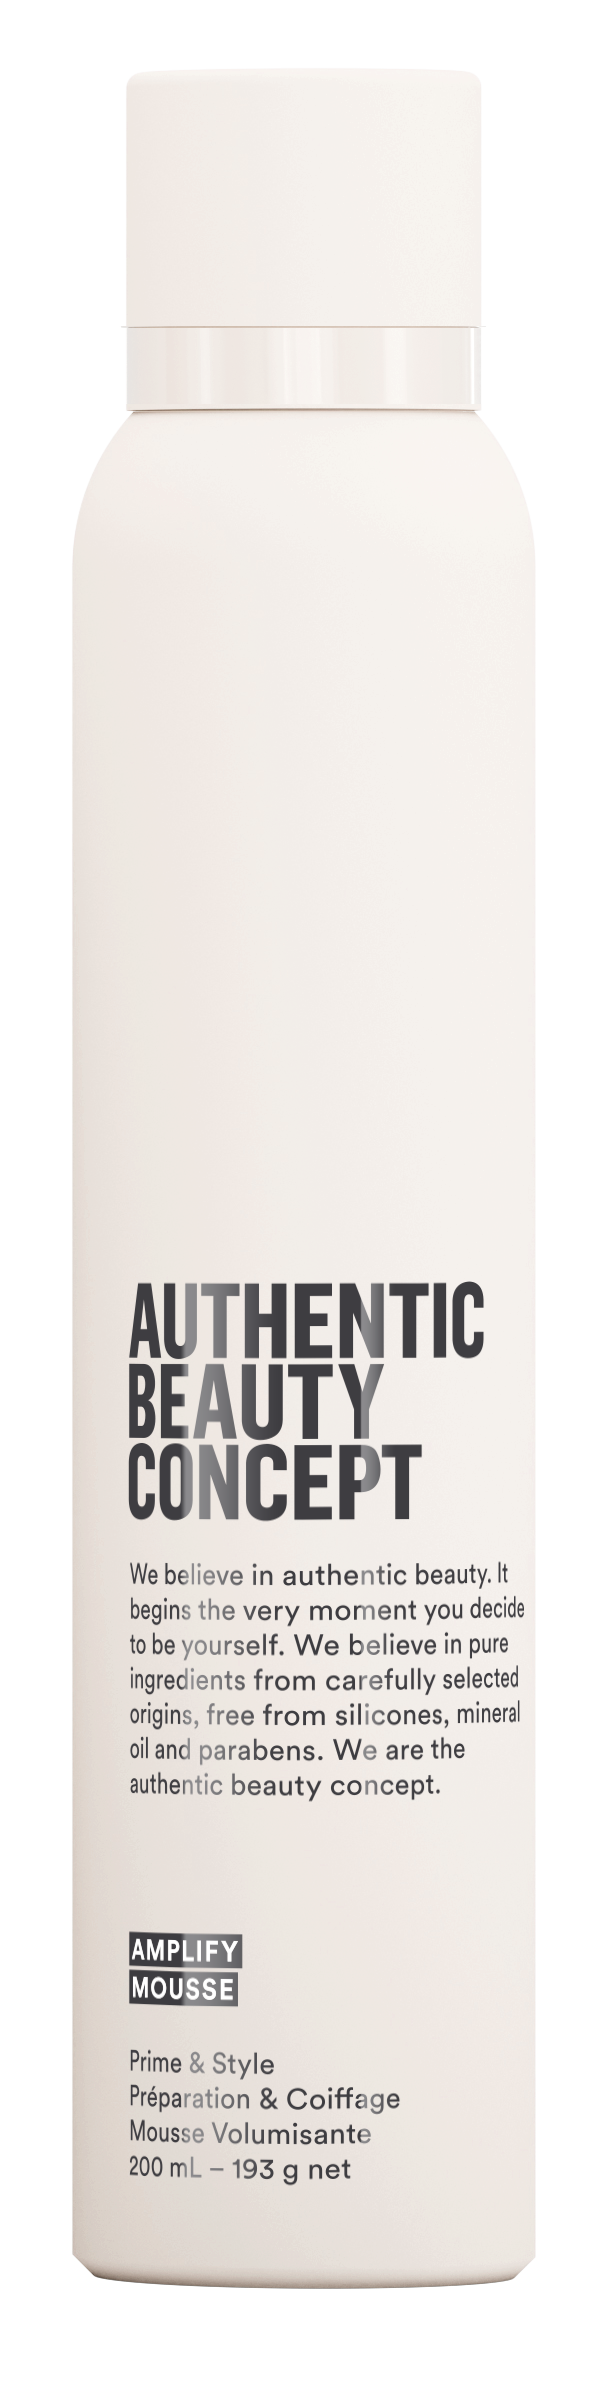 Eds Hair - Authentic Beauty Concept - Embrace Styling - Amplify Mousse 200ml